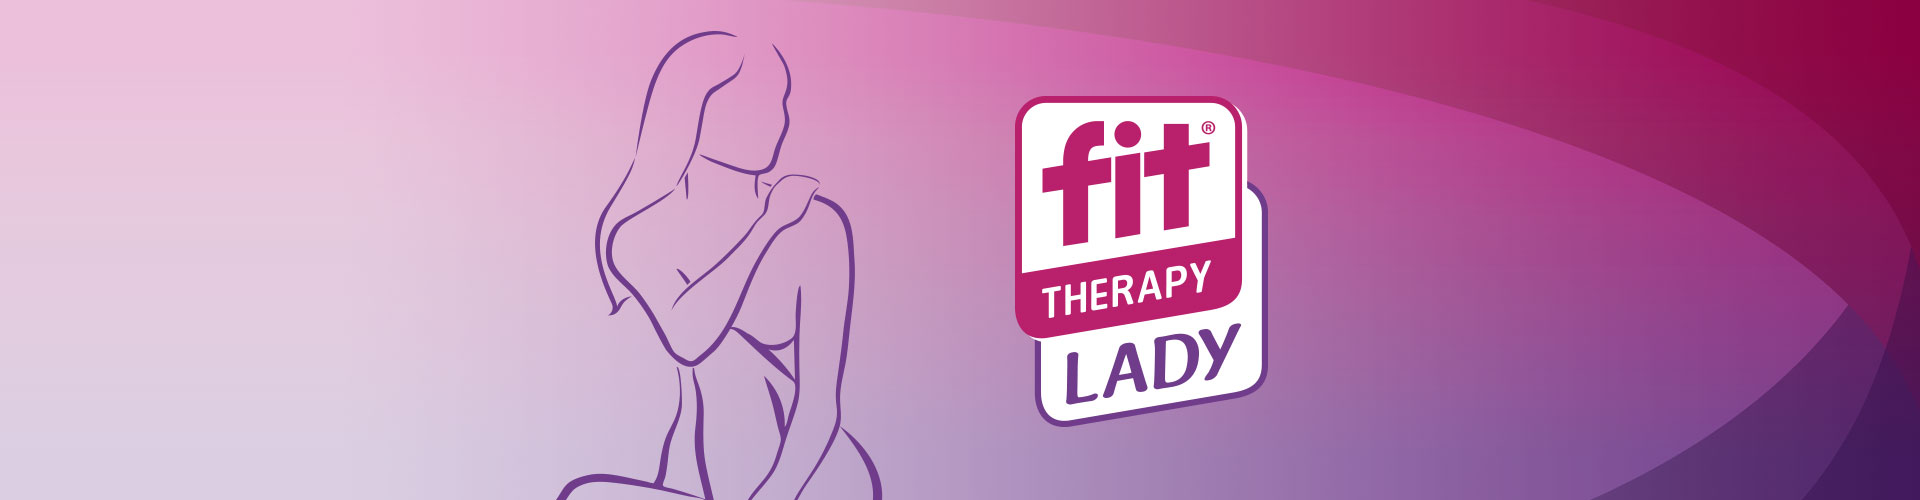 FIT Lady banner